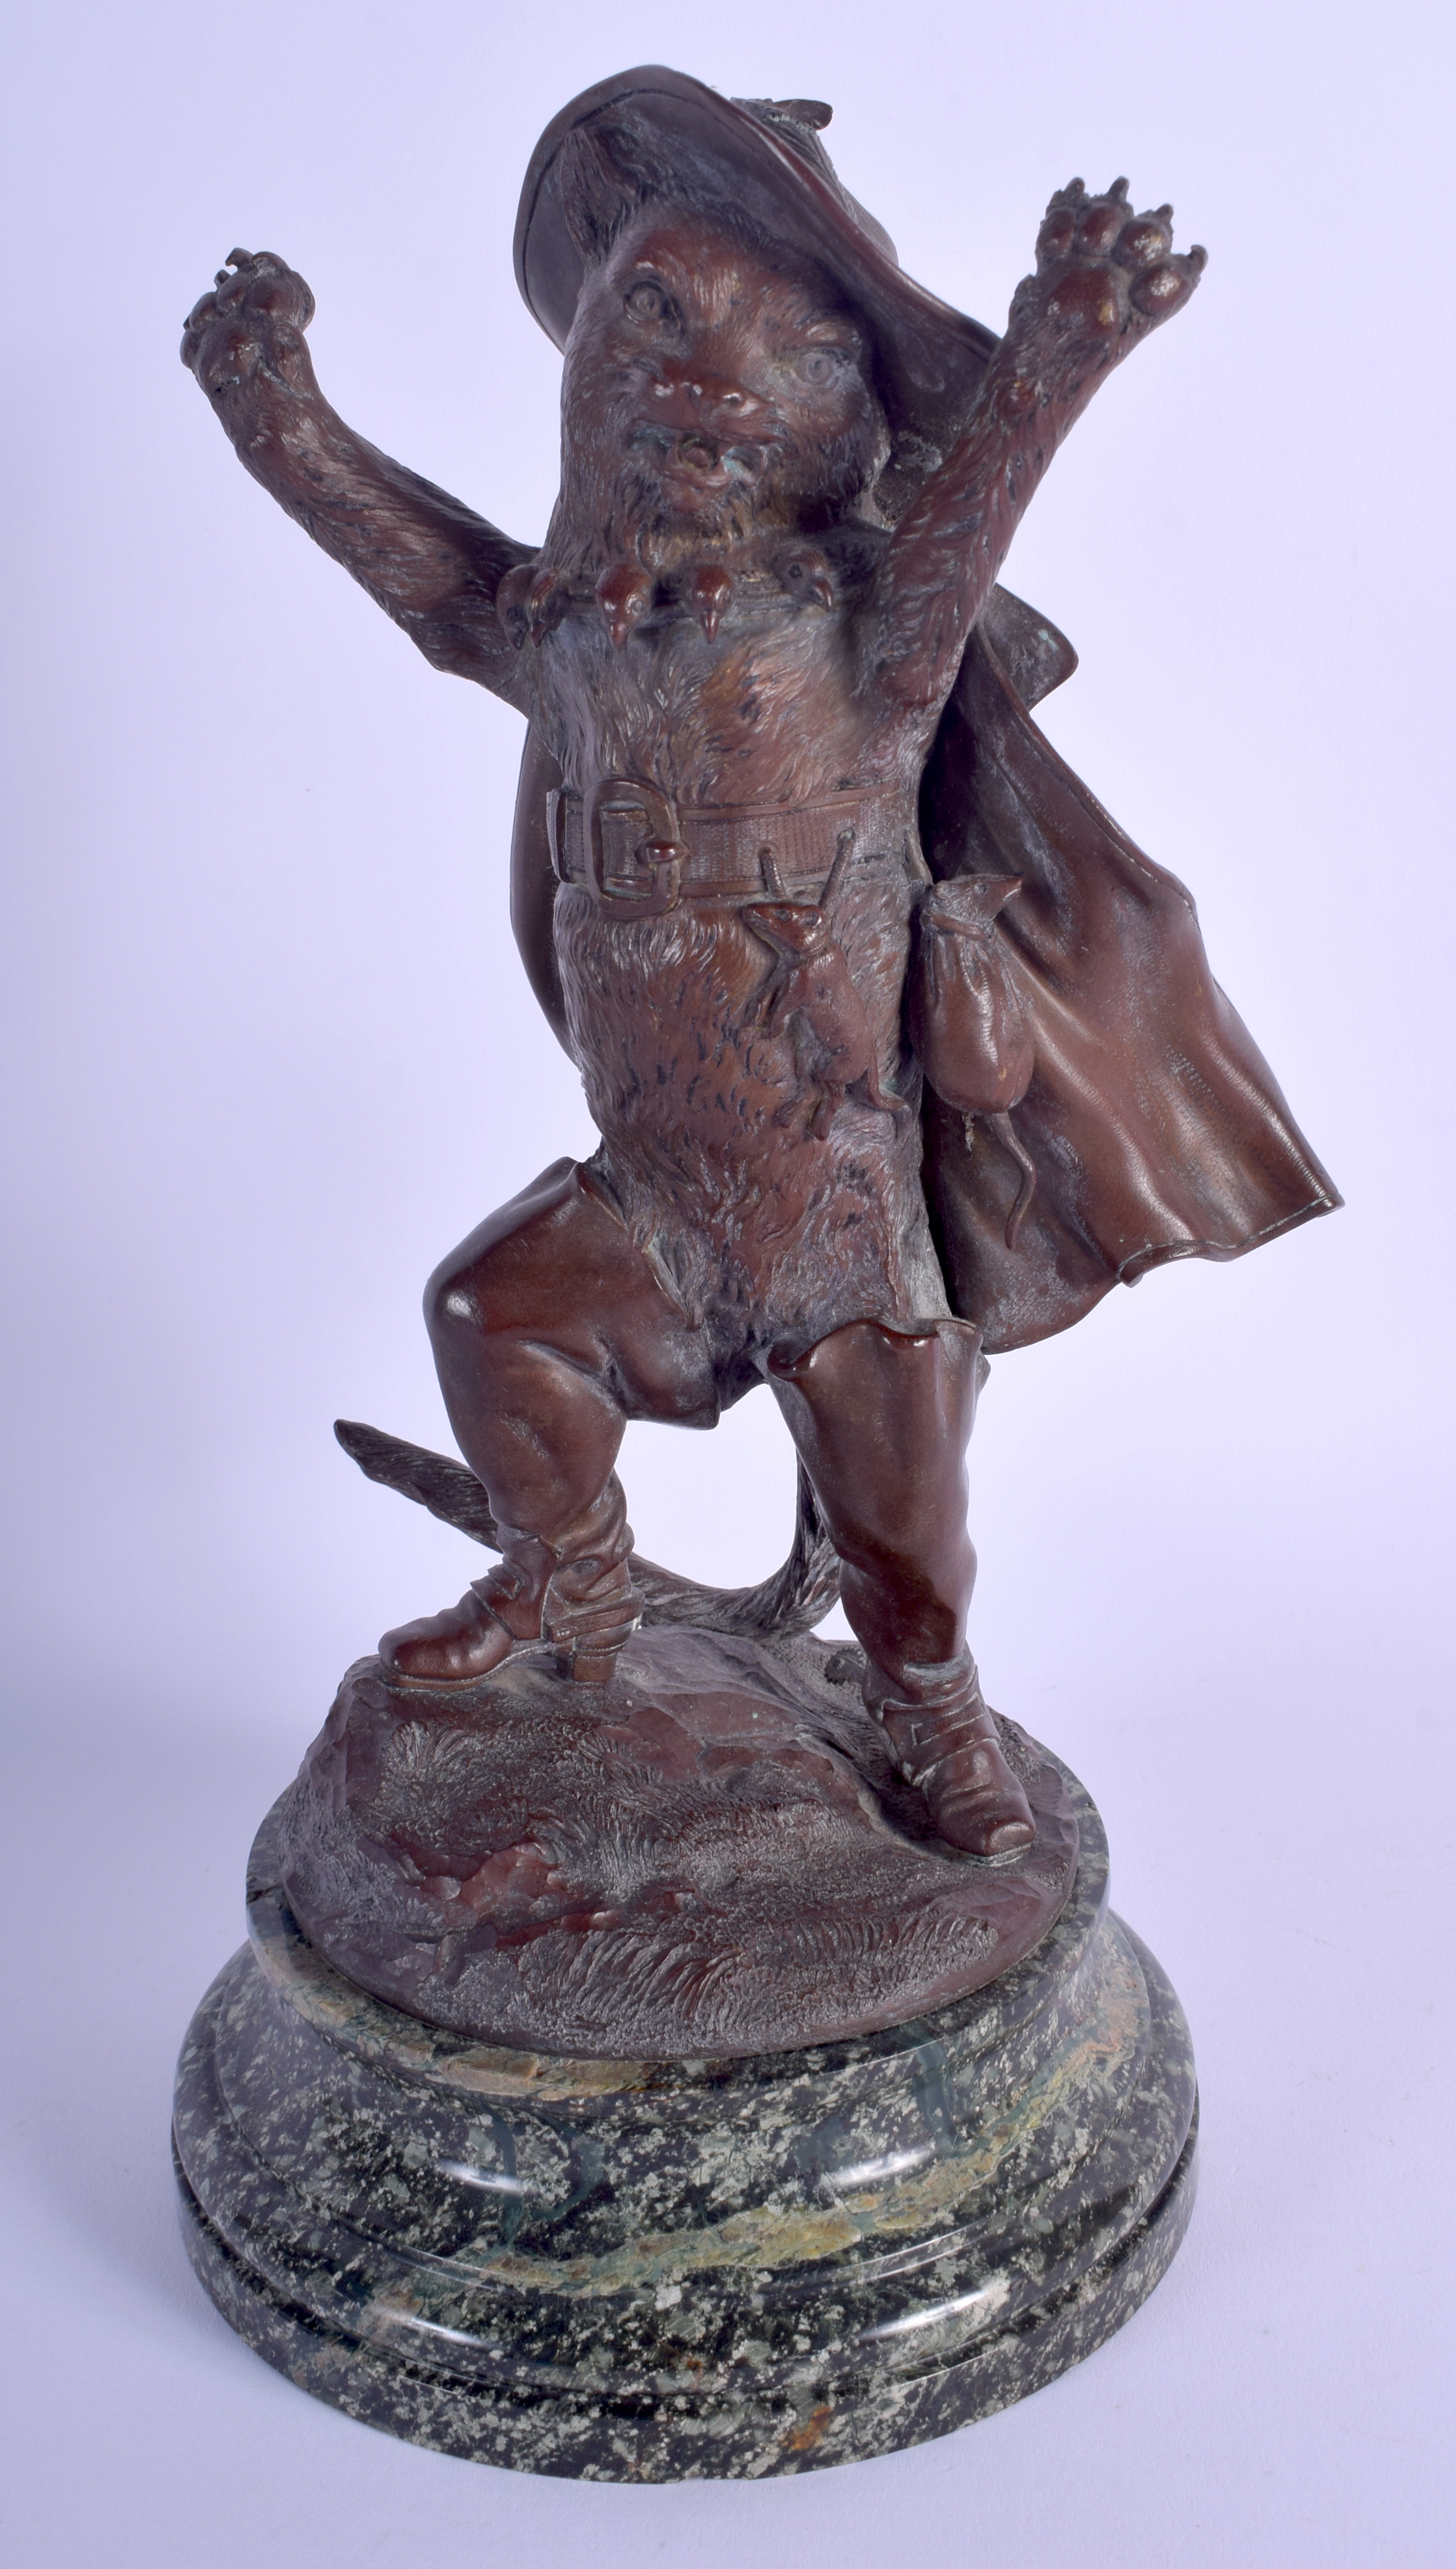 AN EARLY 20TH CENTURY EUROPEAN COLD PAINTED BRONZE FIGURE OF PUSS IN BOOTS modelled with hands rais